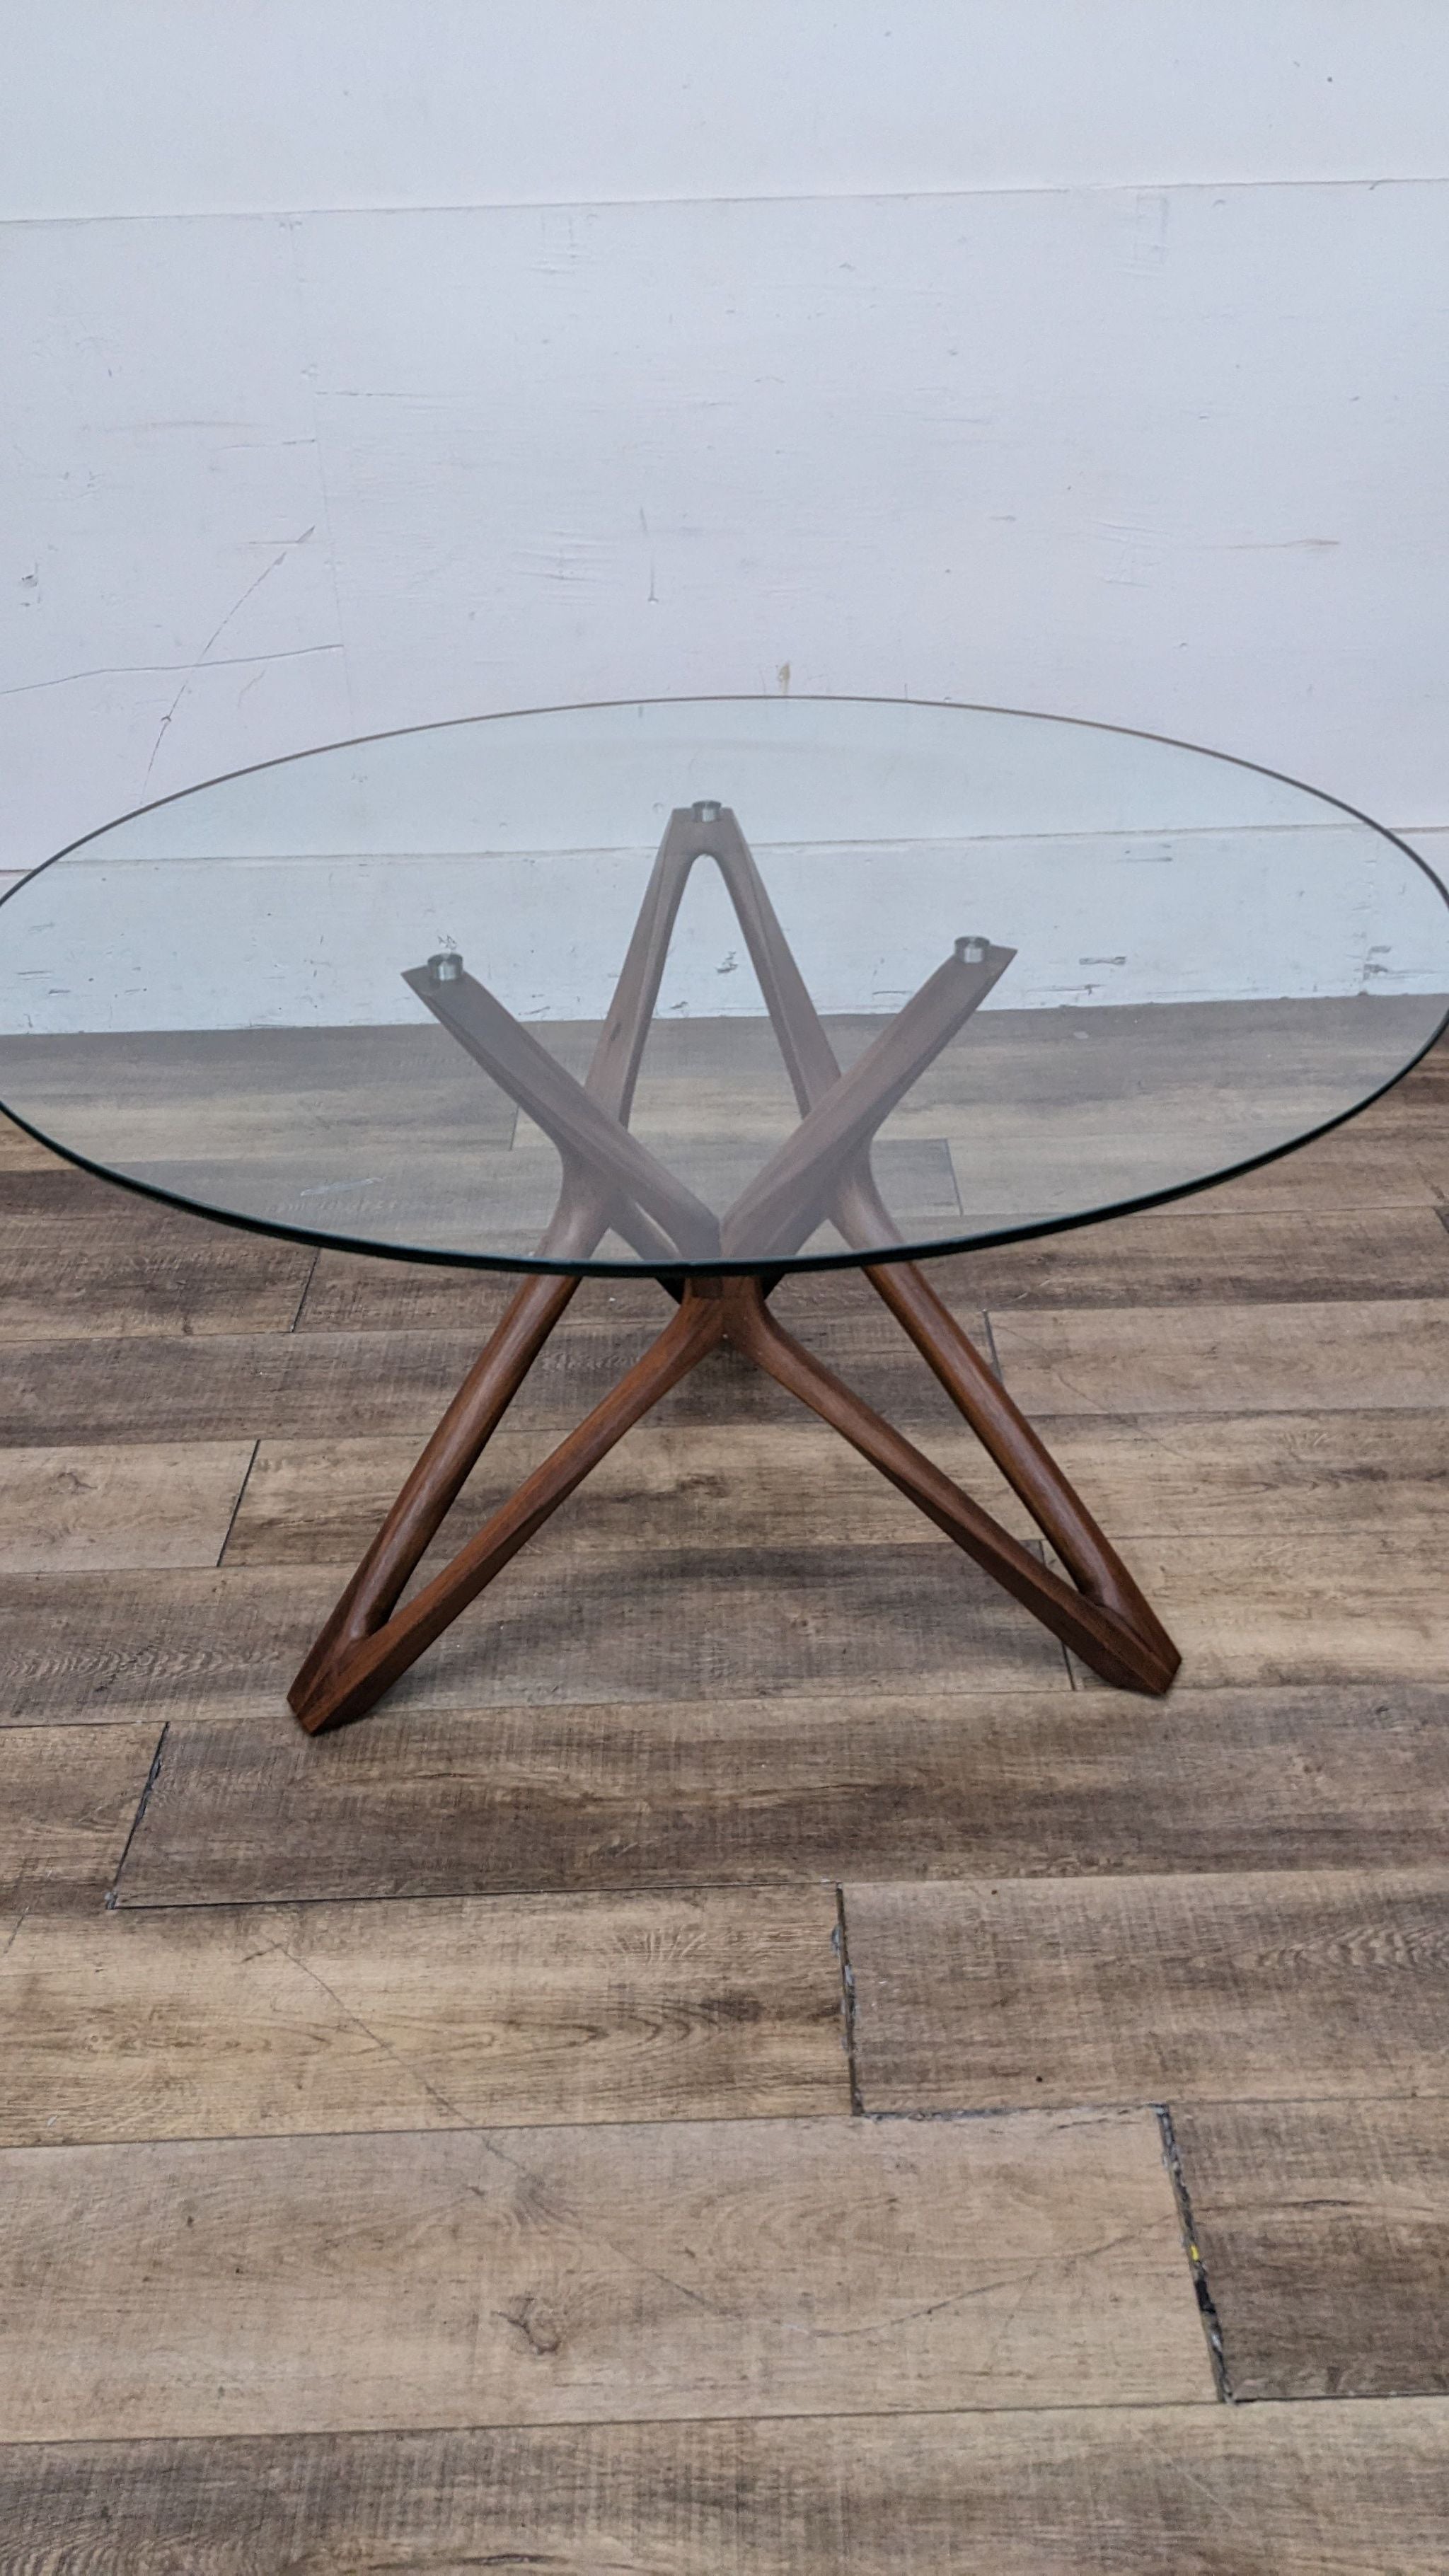 Elegant dining table by Scandinavian Design with a transparent round top and intersecting wooden legs for a modern, airy dining space.